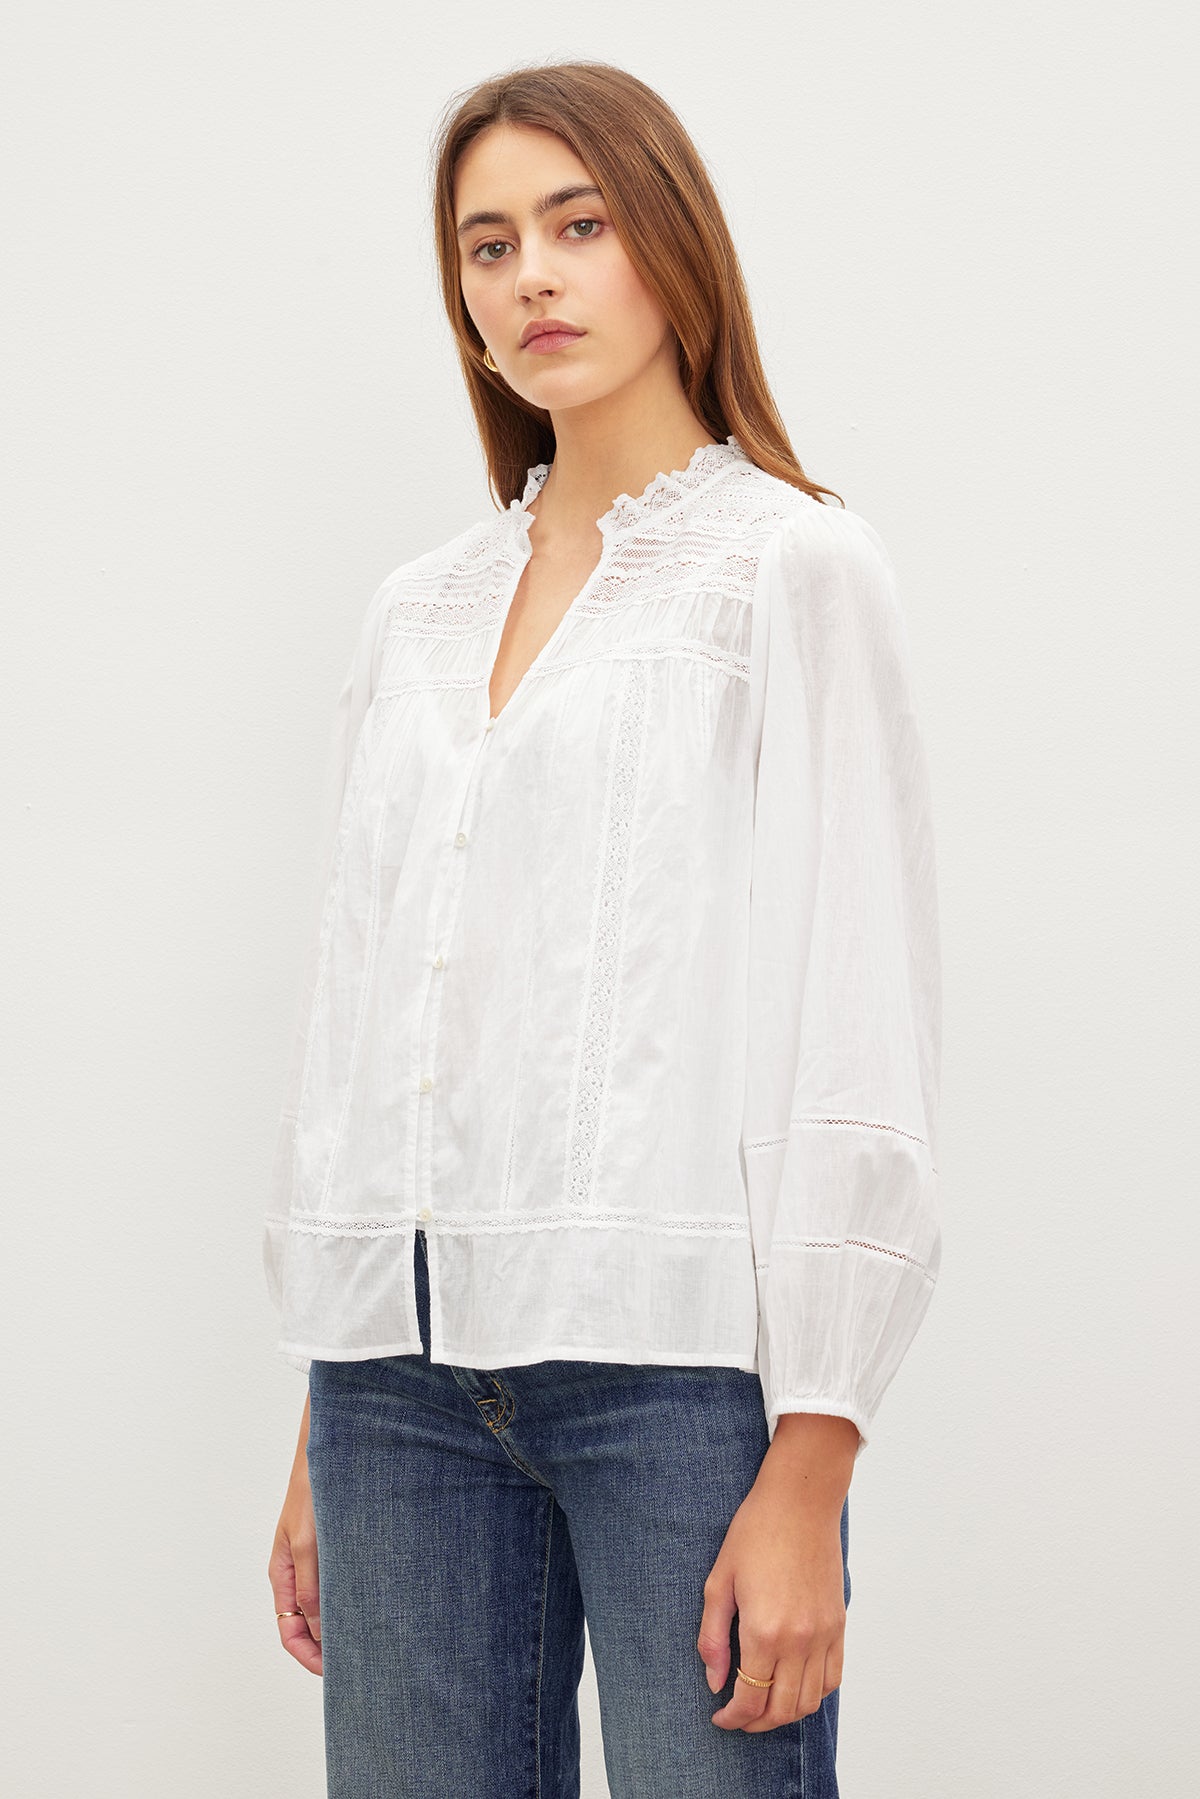 A woman in a white Velvet by Graham & Spencer LIAM COTTON LACE BUTTON FRONT TOP shirt.-35982303789249